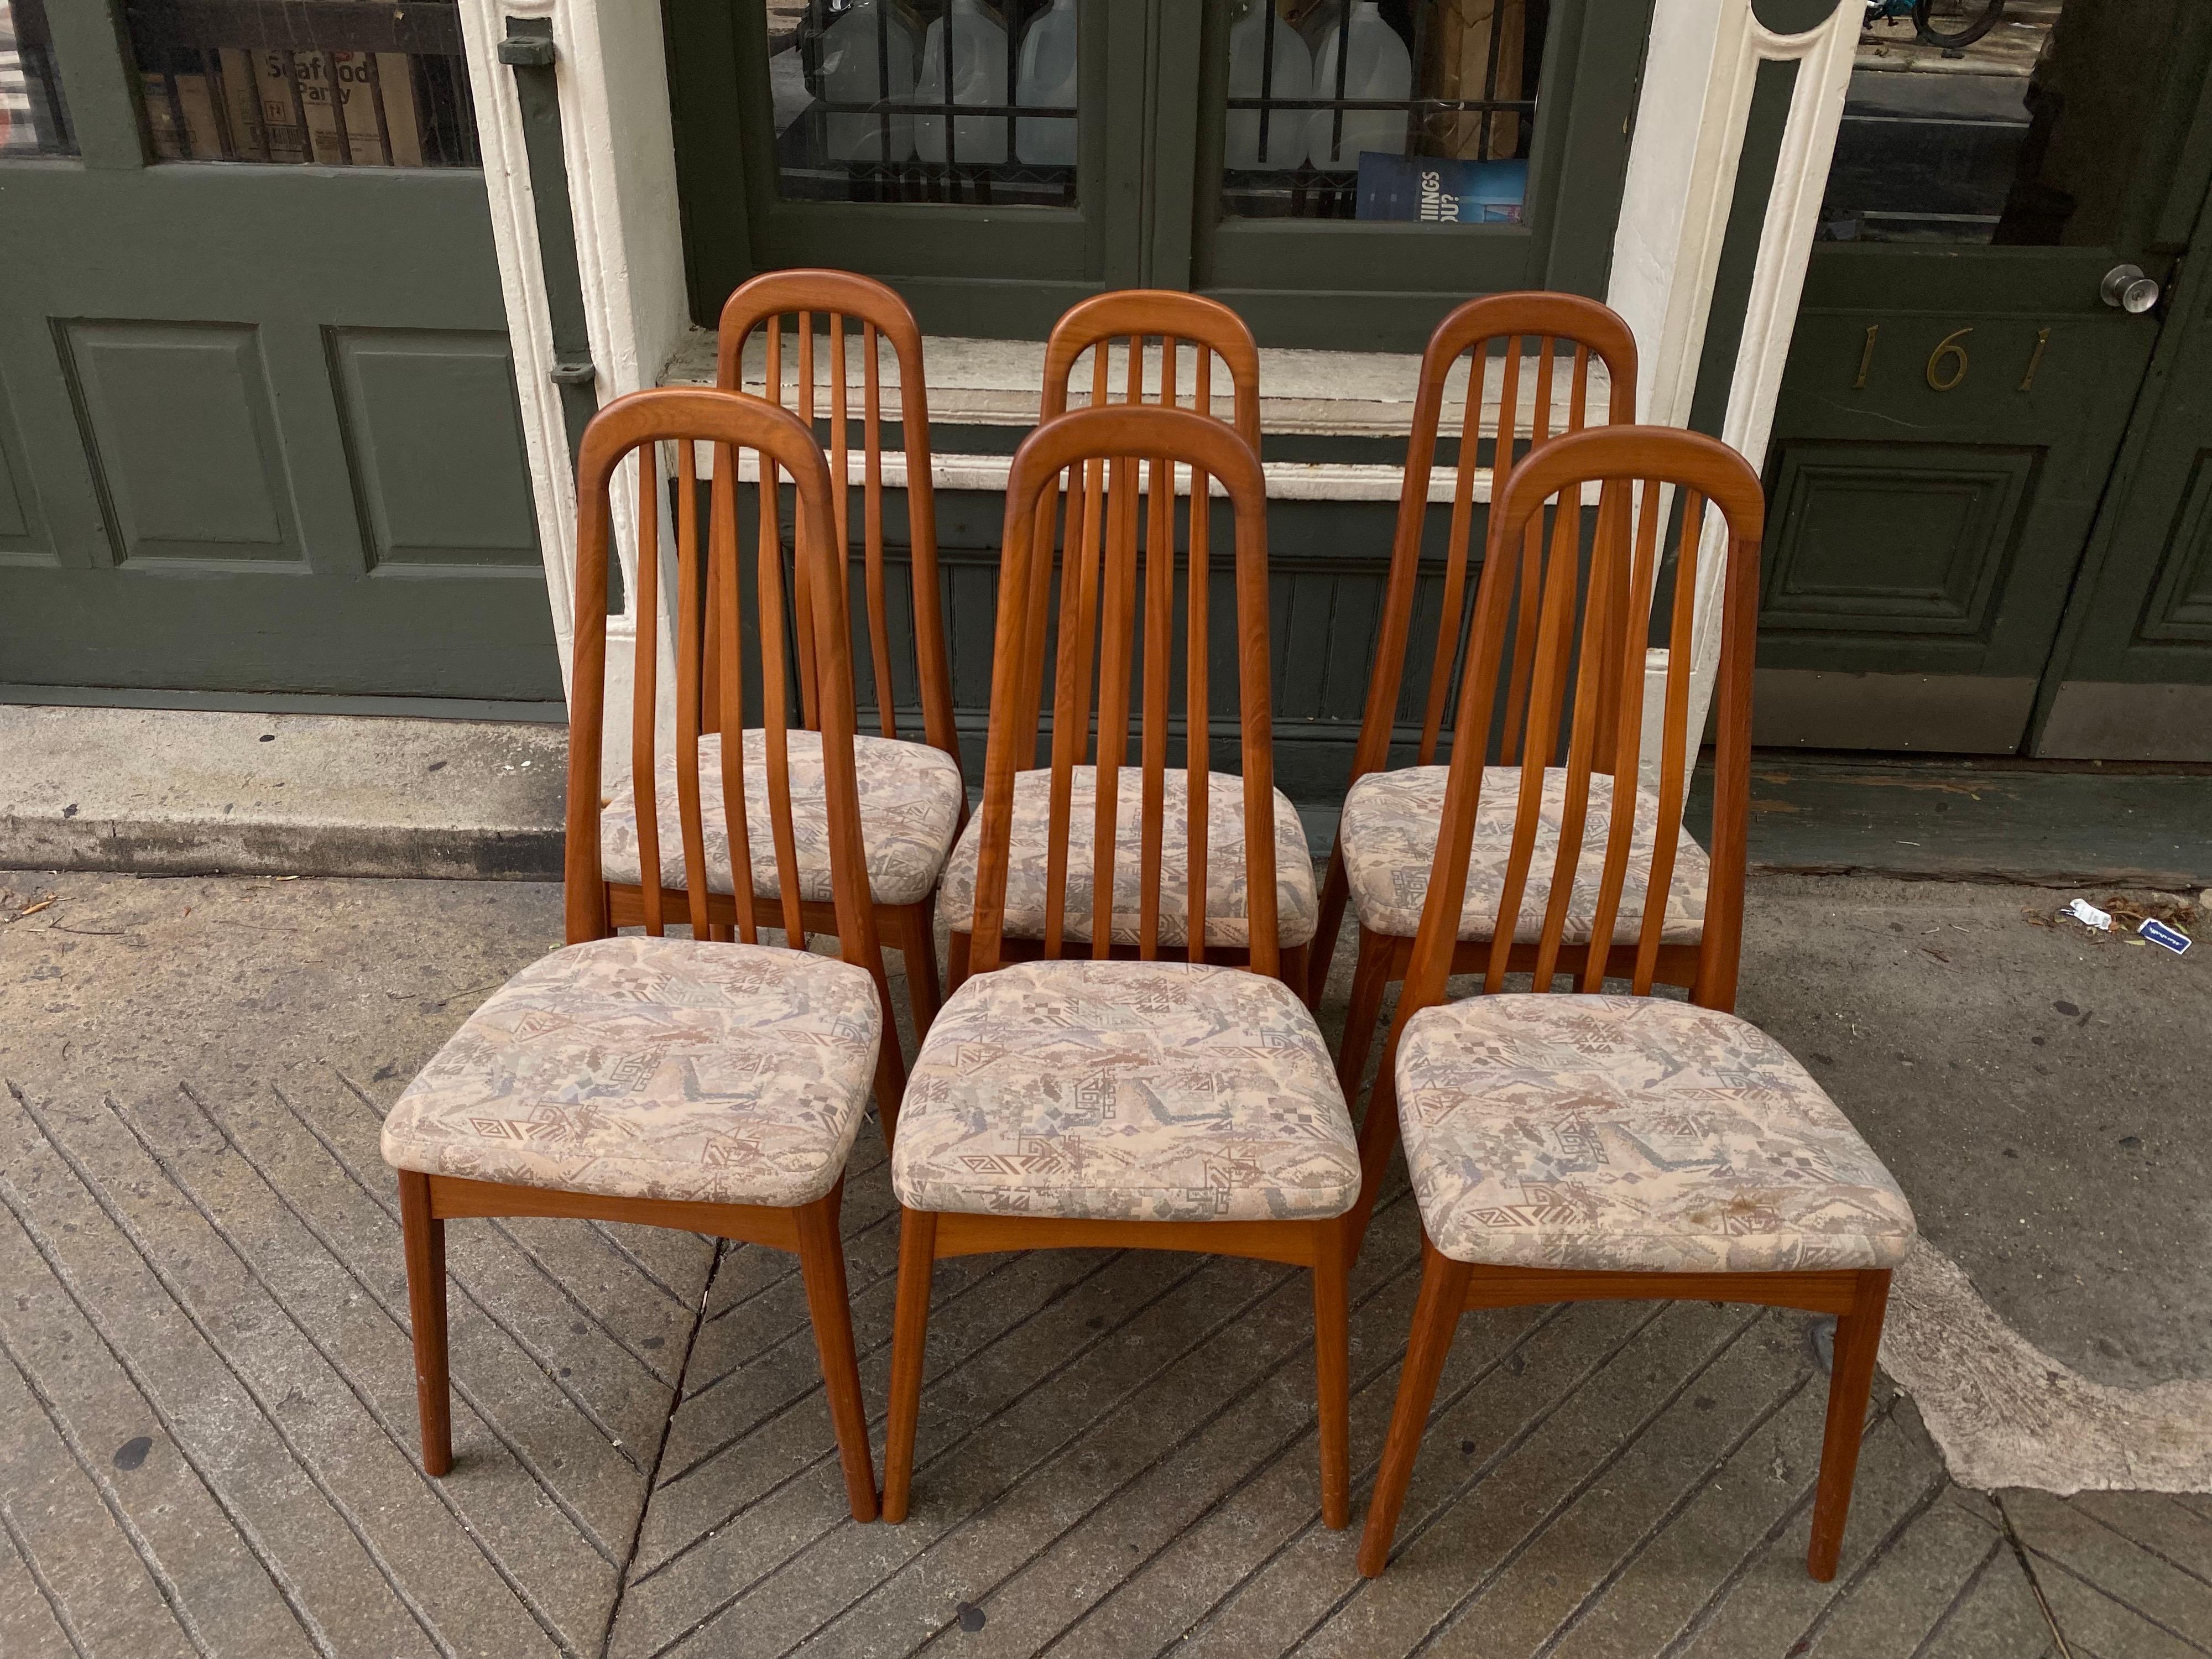 Set of 6 high back Benny Linden solid teak dining chairs. Probably dating from the 1980's. In very clean condition, easy enough to put your fabric on these chairs. High back chairs always look great around a table! ready for thanksgiving?